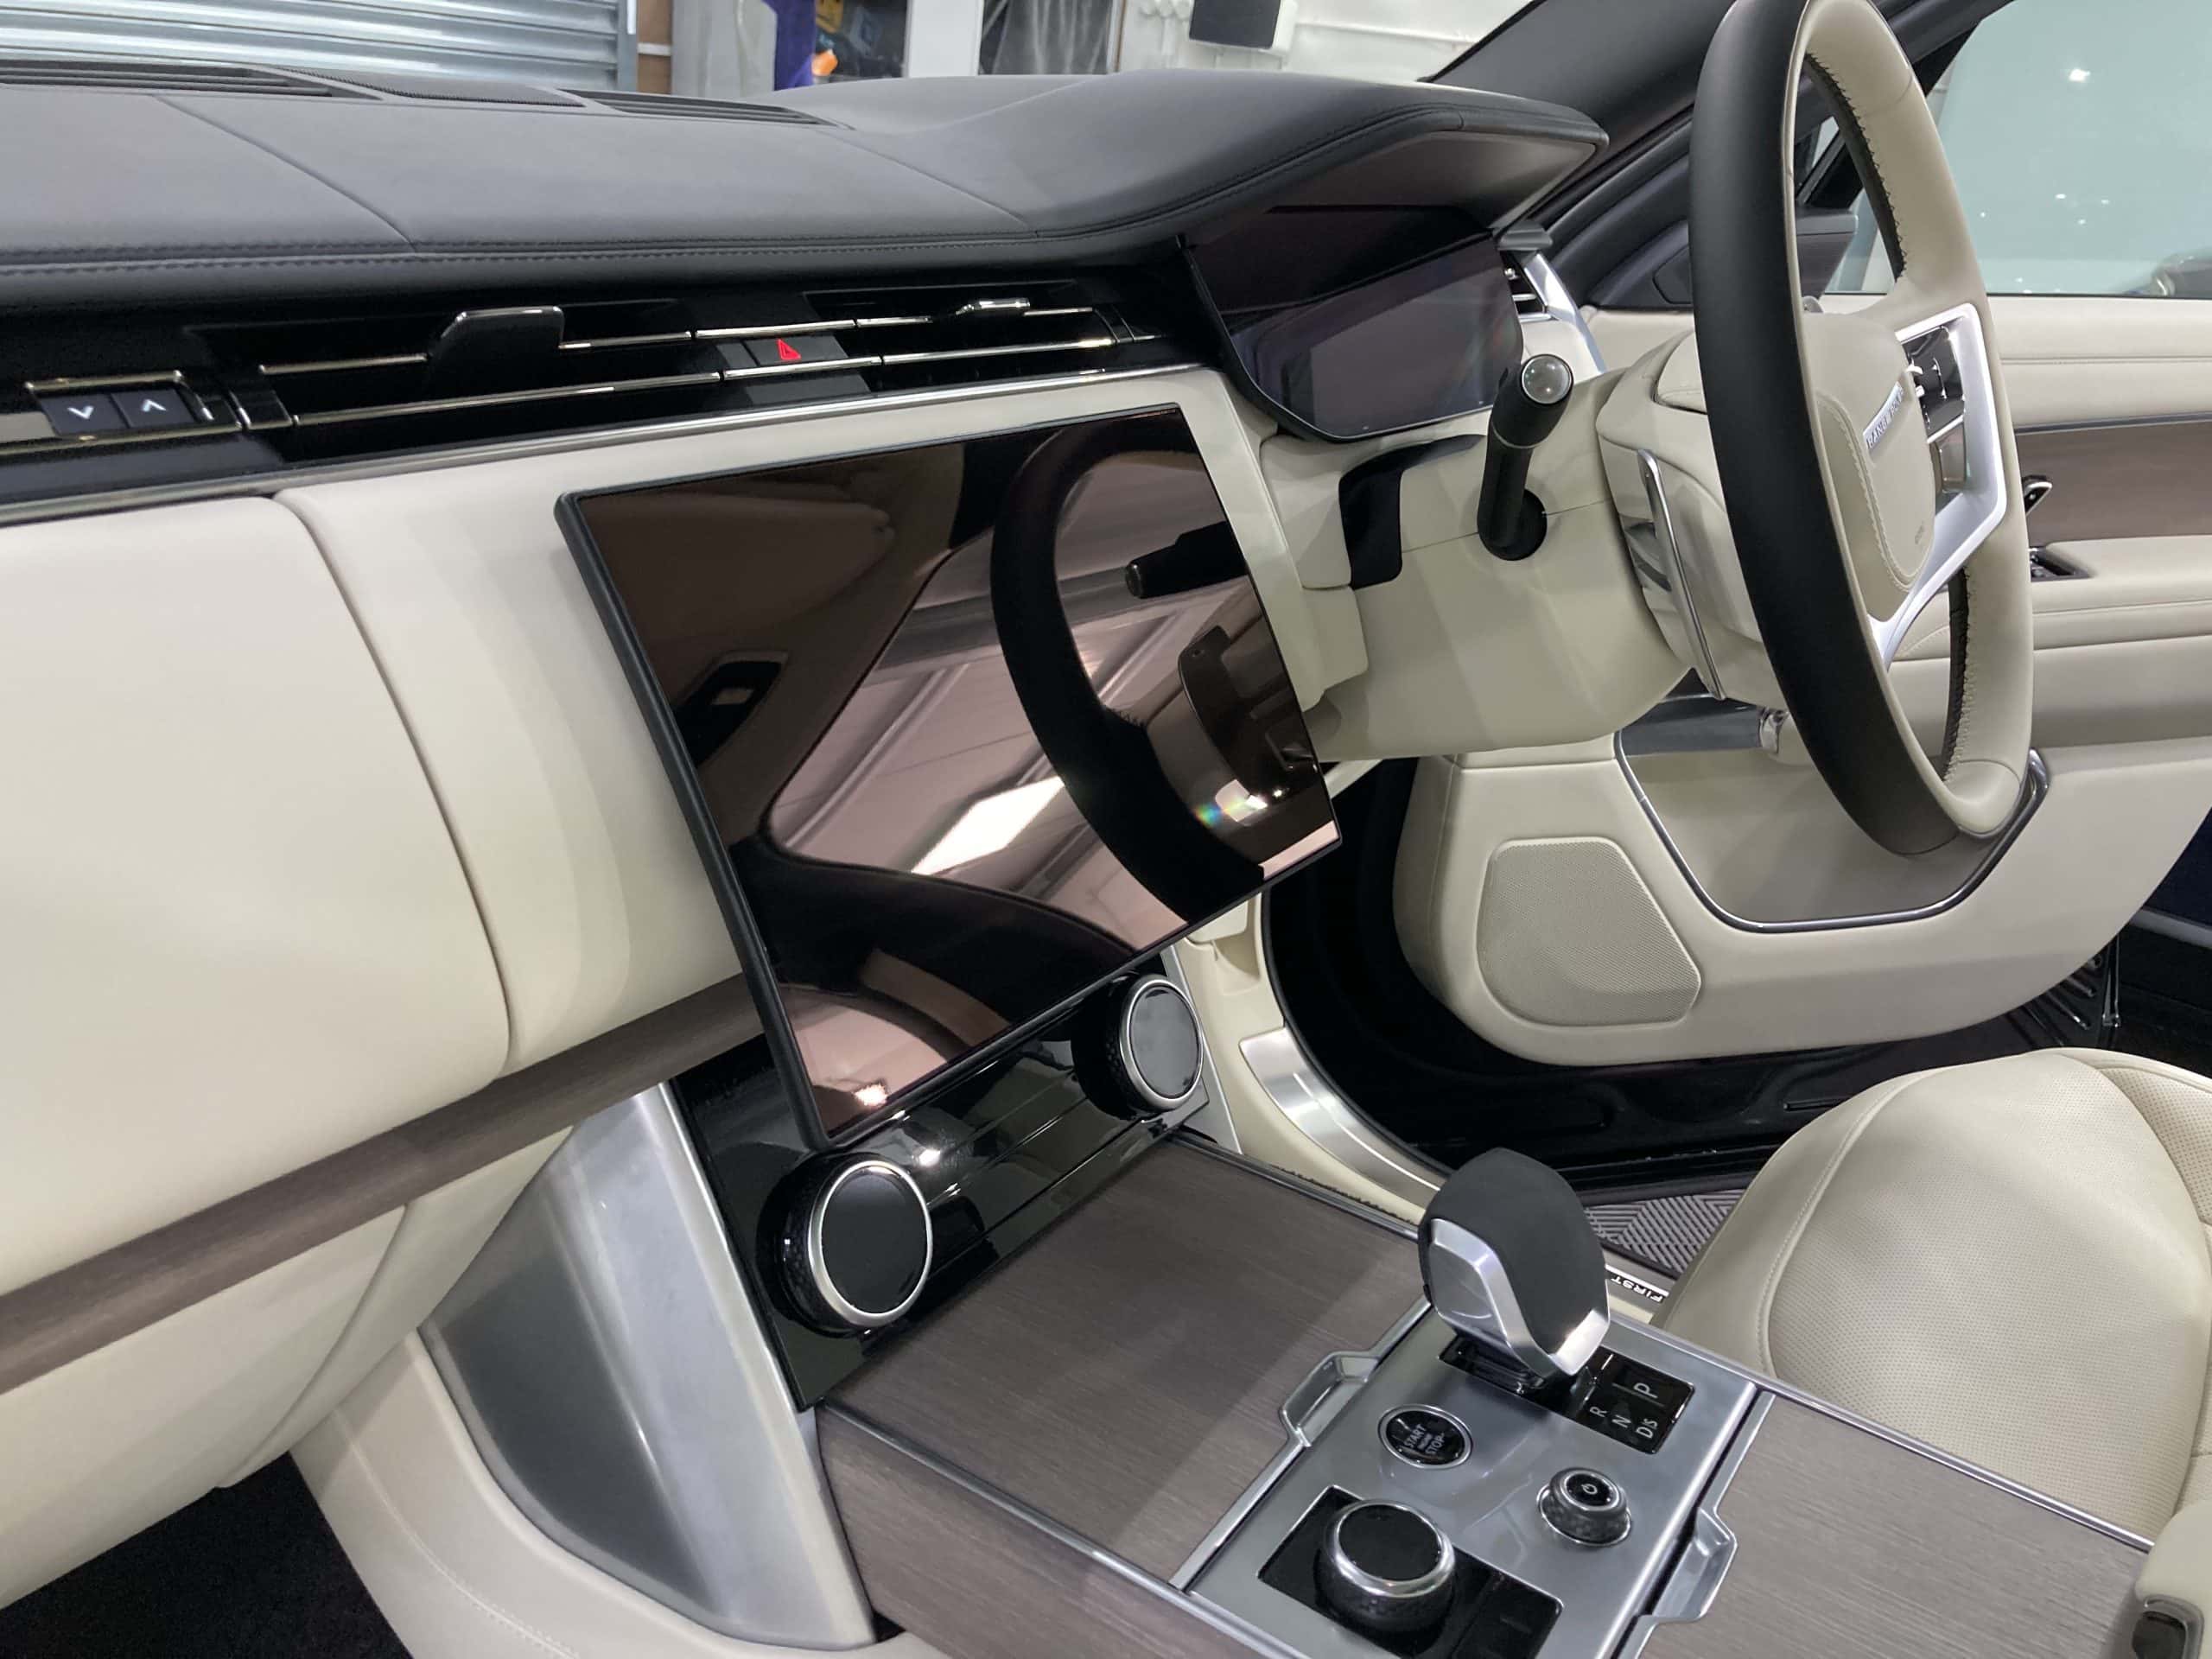 Interior of a modern car showcasing a sleek dashboard with a digital display, center console with controls, and a steering wheel. The car detailing highlights the luxurious finish. The color scheme is predominantly light beige and black.